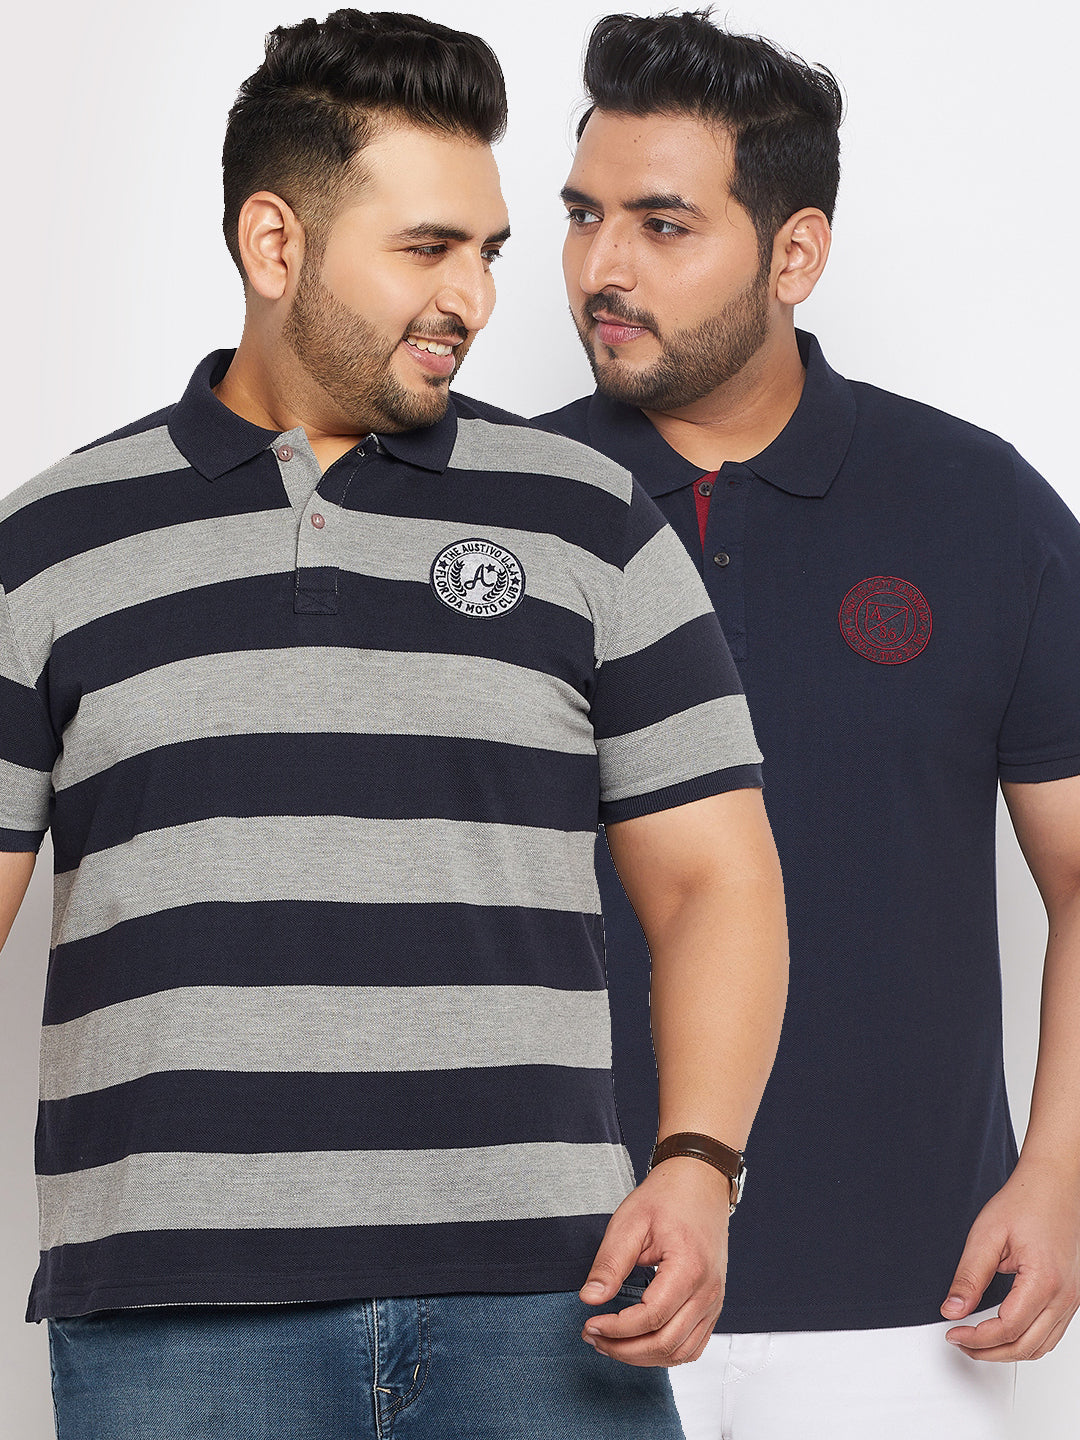 Pack of 2 Striped Men Polo Neck Multicolor T-Shirt